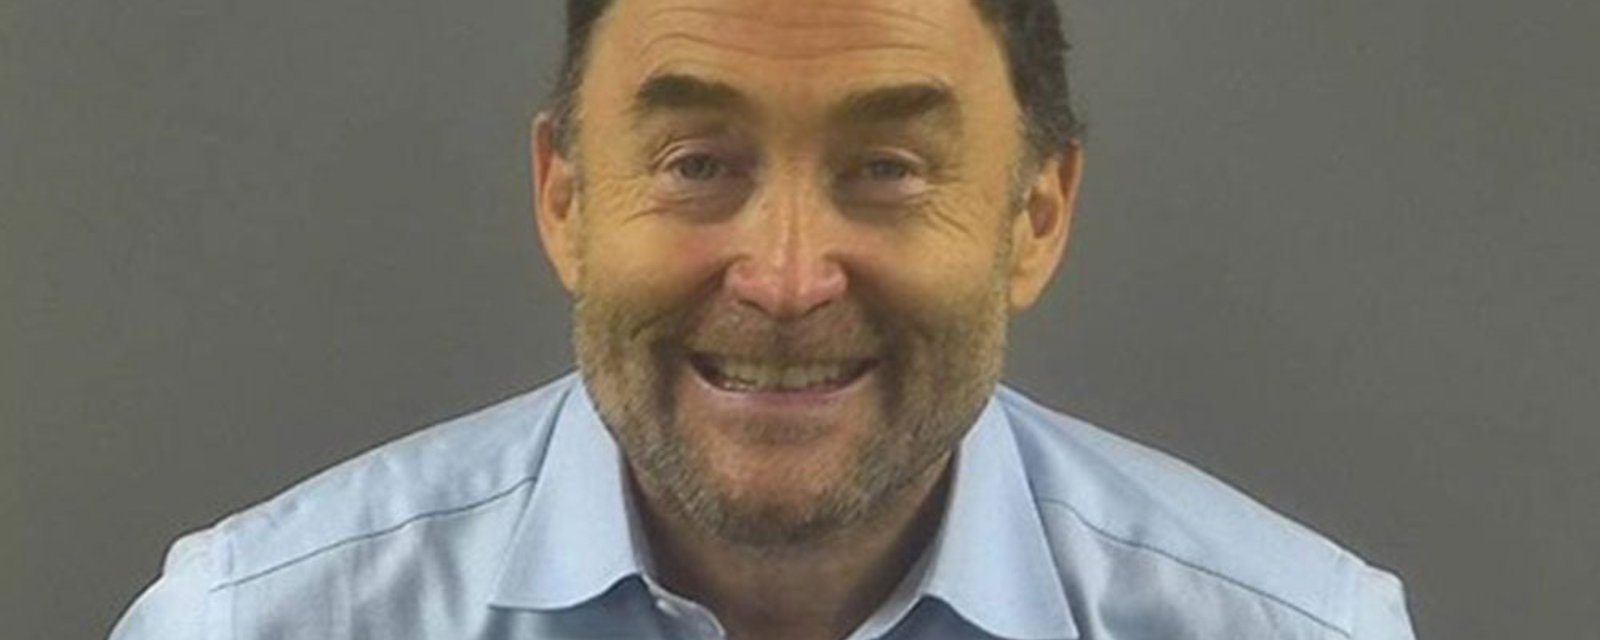 Ed Belfour arrested on intoxication charges